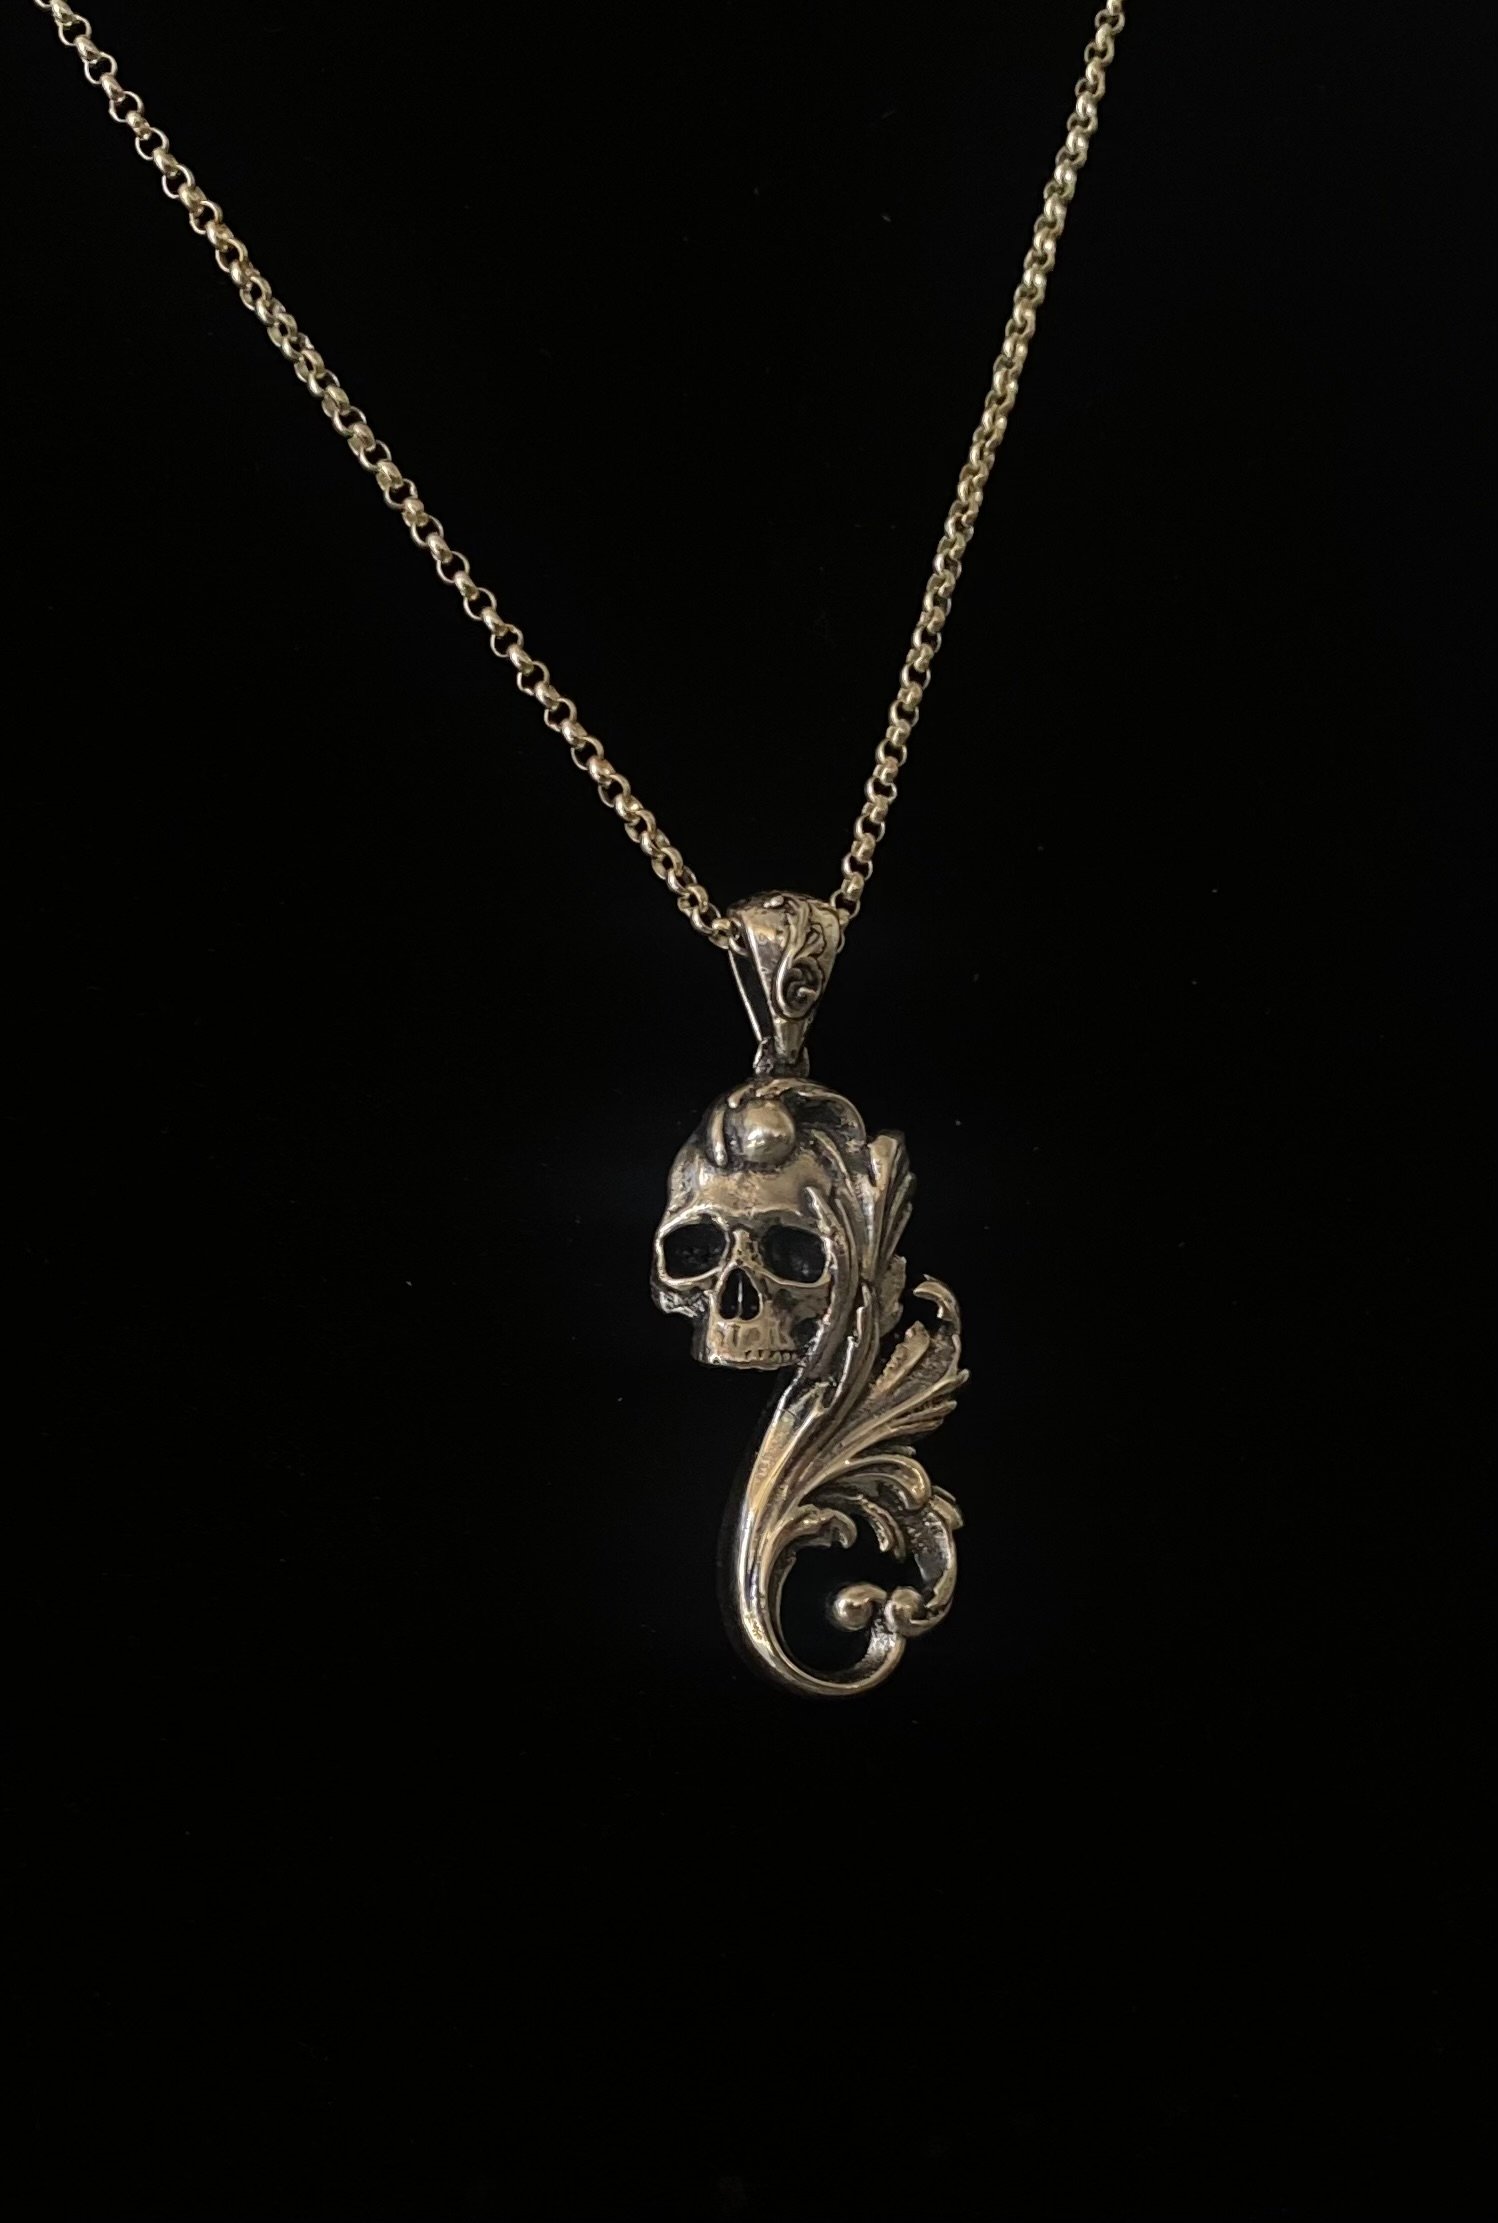 Image of Skull Pendant with filigree accents